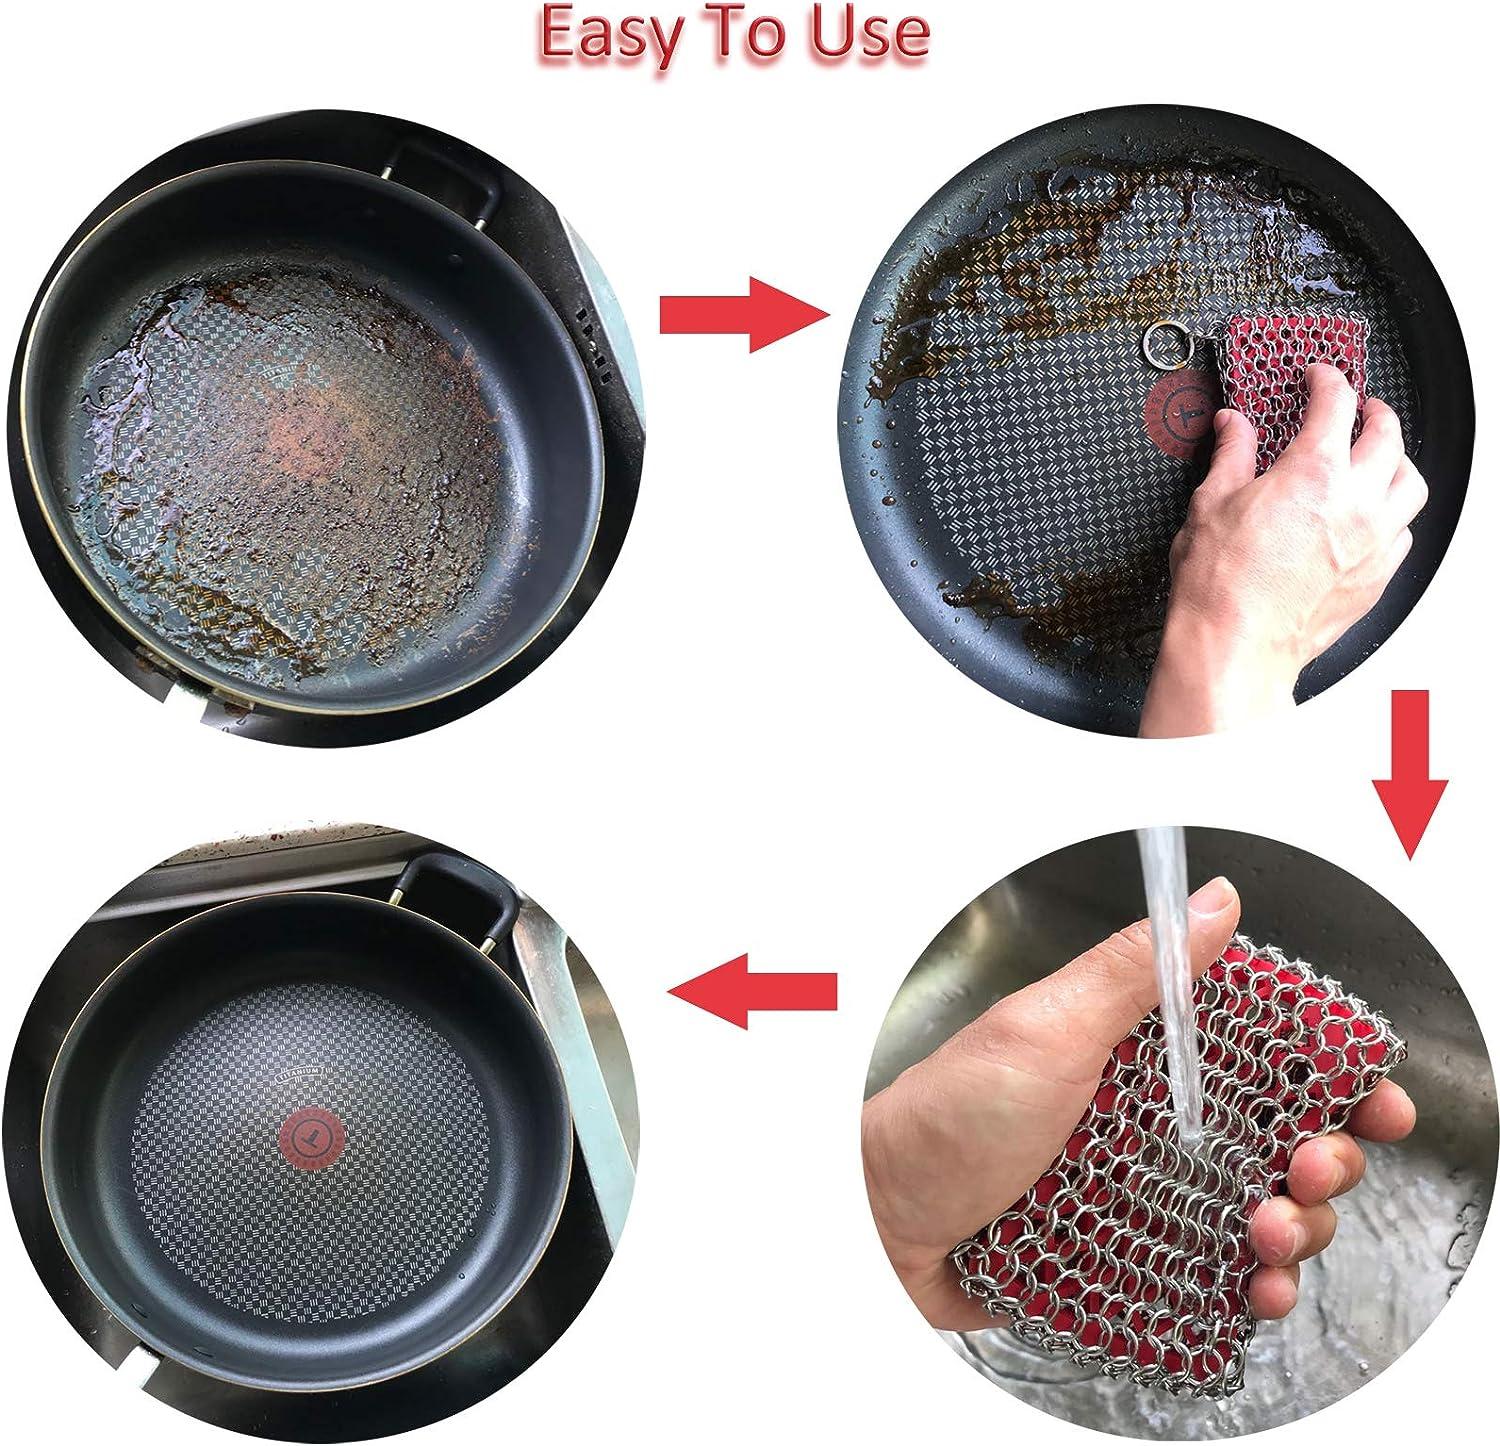  Cast Iron Skillet Cleaner, 316 Stainless Steel Chainmail  Cleaning Scrubber with Silicone Insert for Cleaning Castiron  Pan,Griddle,Baking Pan : Health & Household